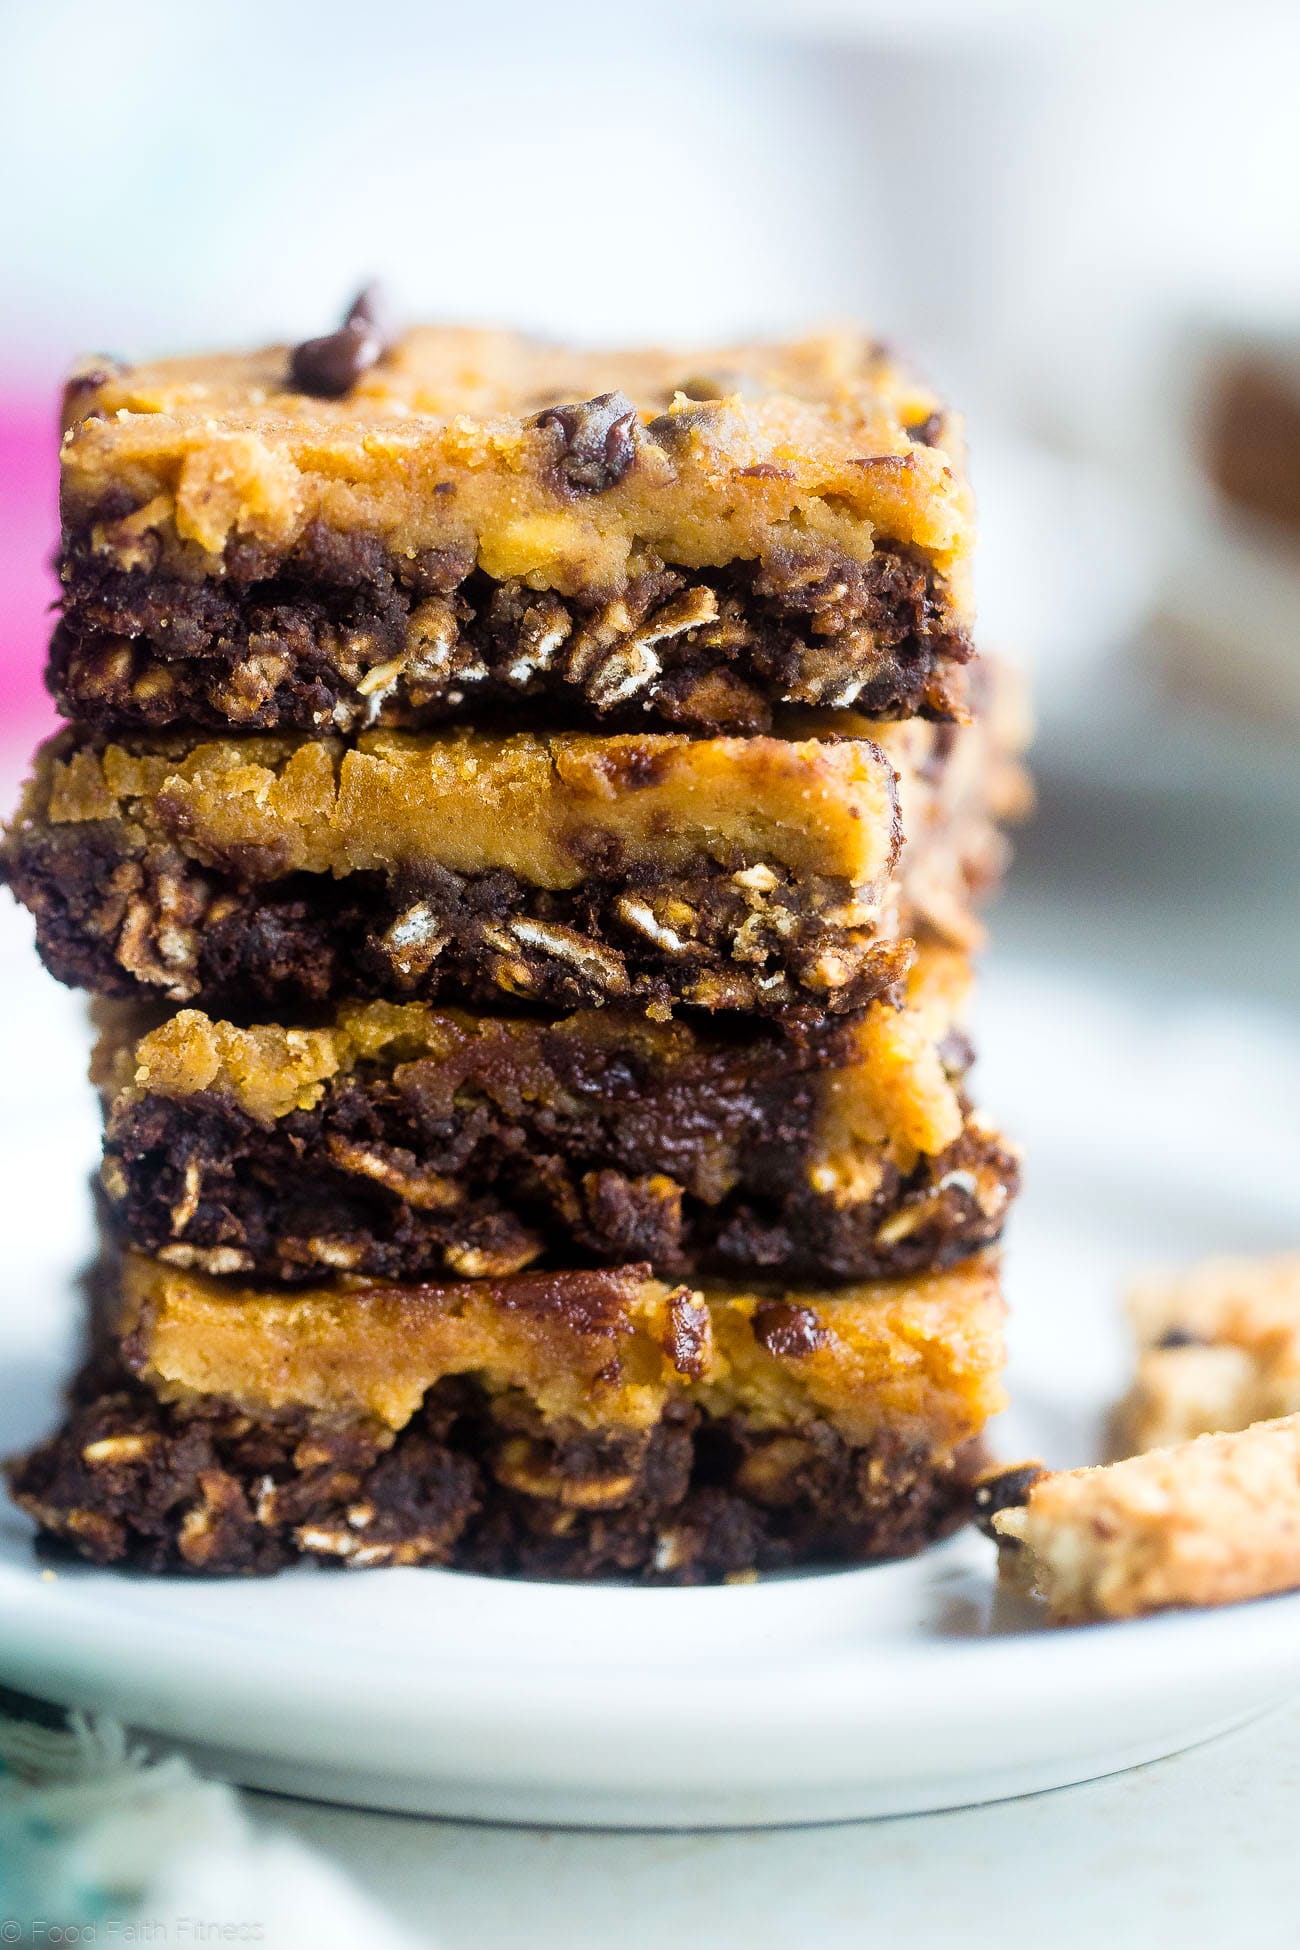 These Vegan Cookie Dough Oatmeal Breakfast Bars are perfect for a healthy grab and go breakfast. Plus they taste like dessert! Easy to make and gluten free!